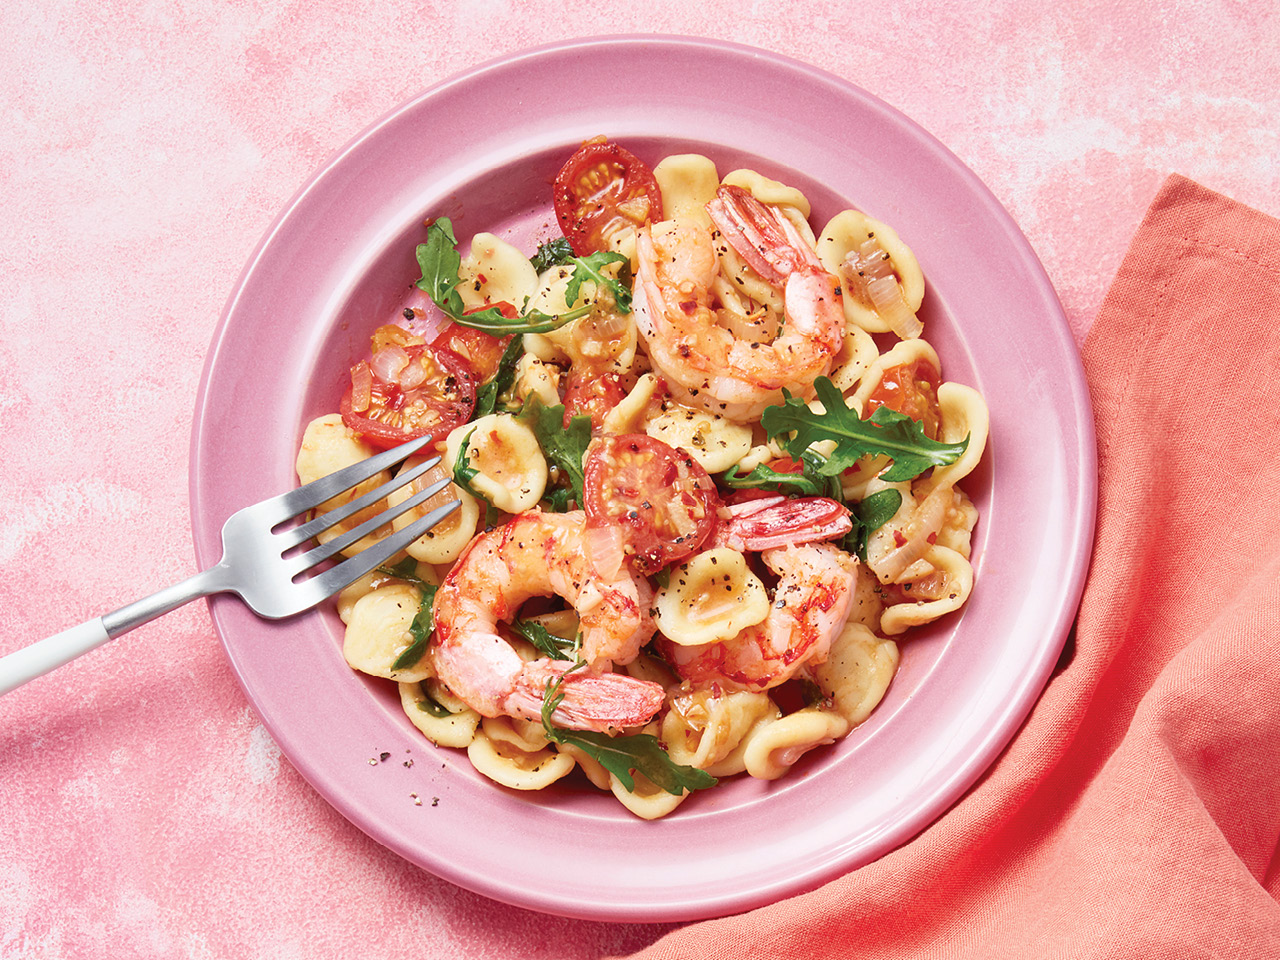 Pasta, shrimp, tomato and arugula in a white bowl on a pink background with a used spoon beside.